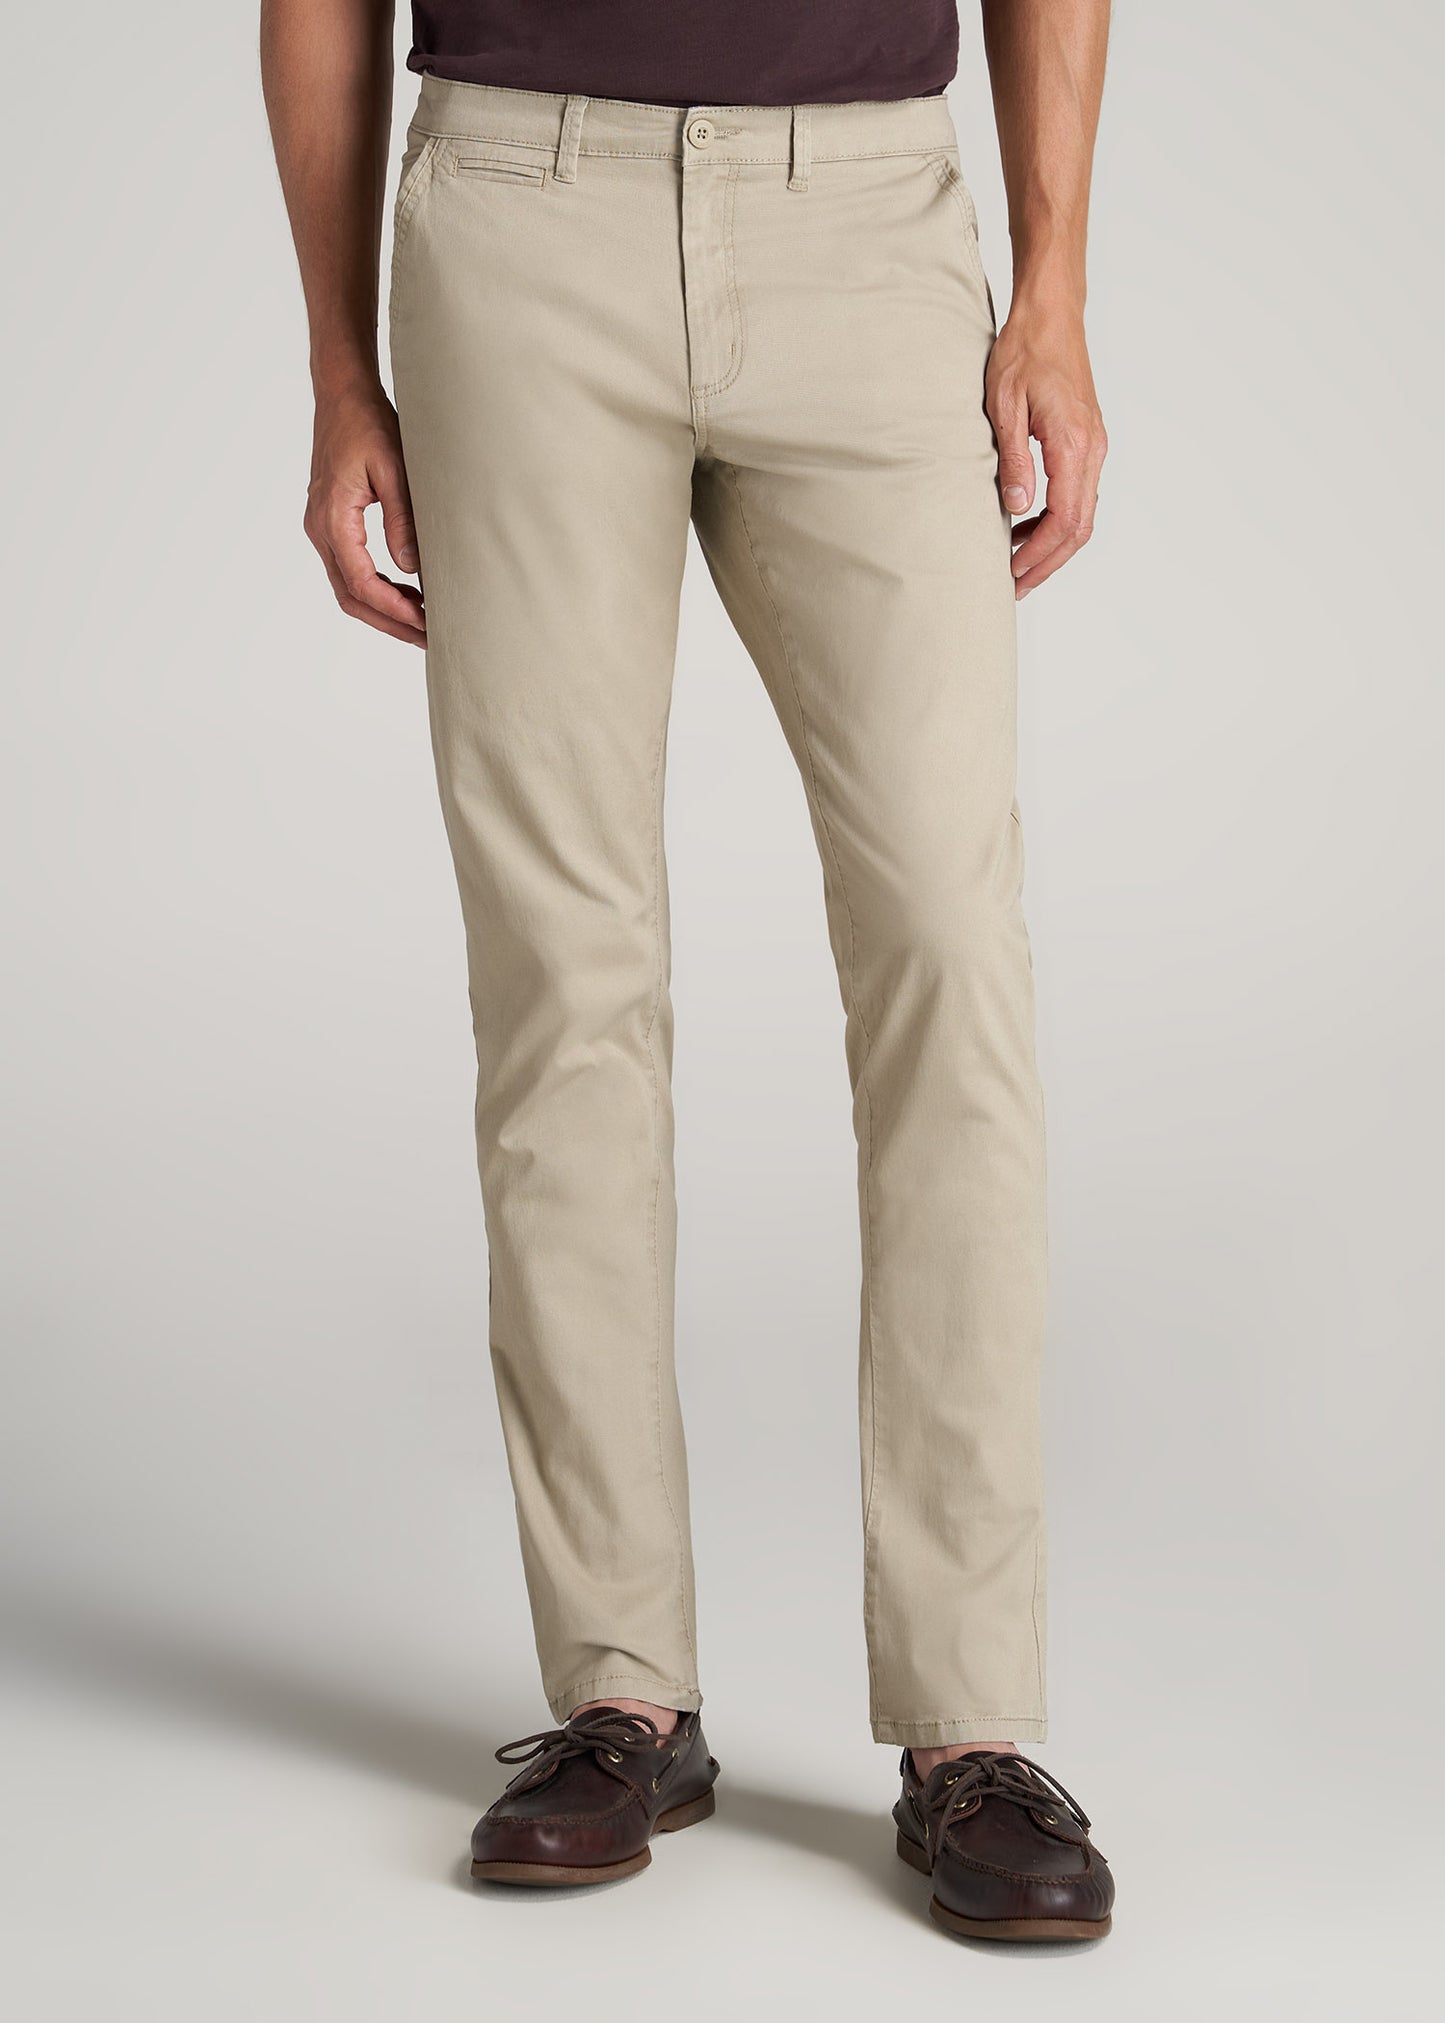 Tall guy wearing American Tall's Carman Tapered Chinos in the color Desert Khaki.